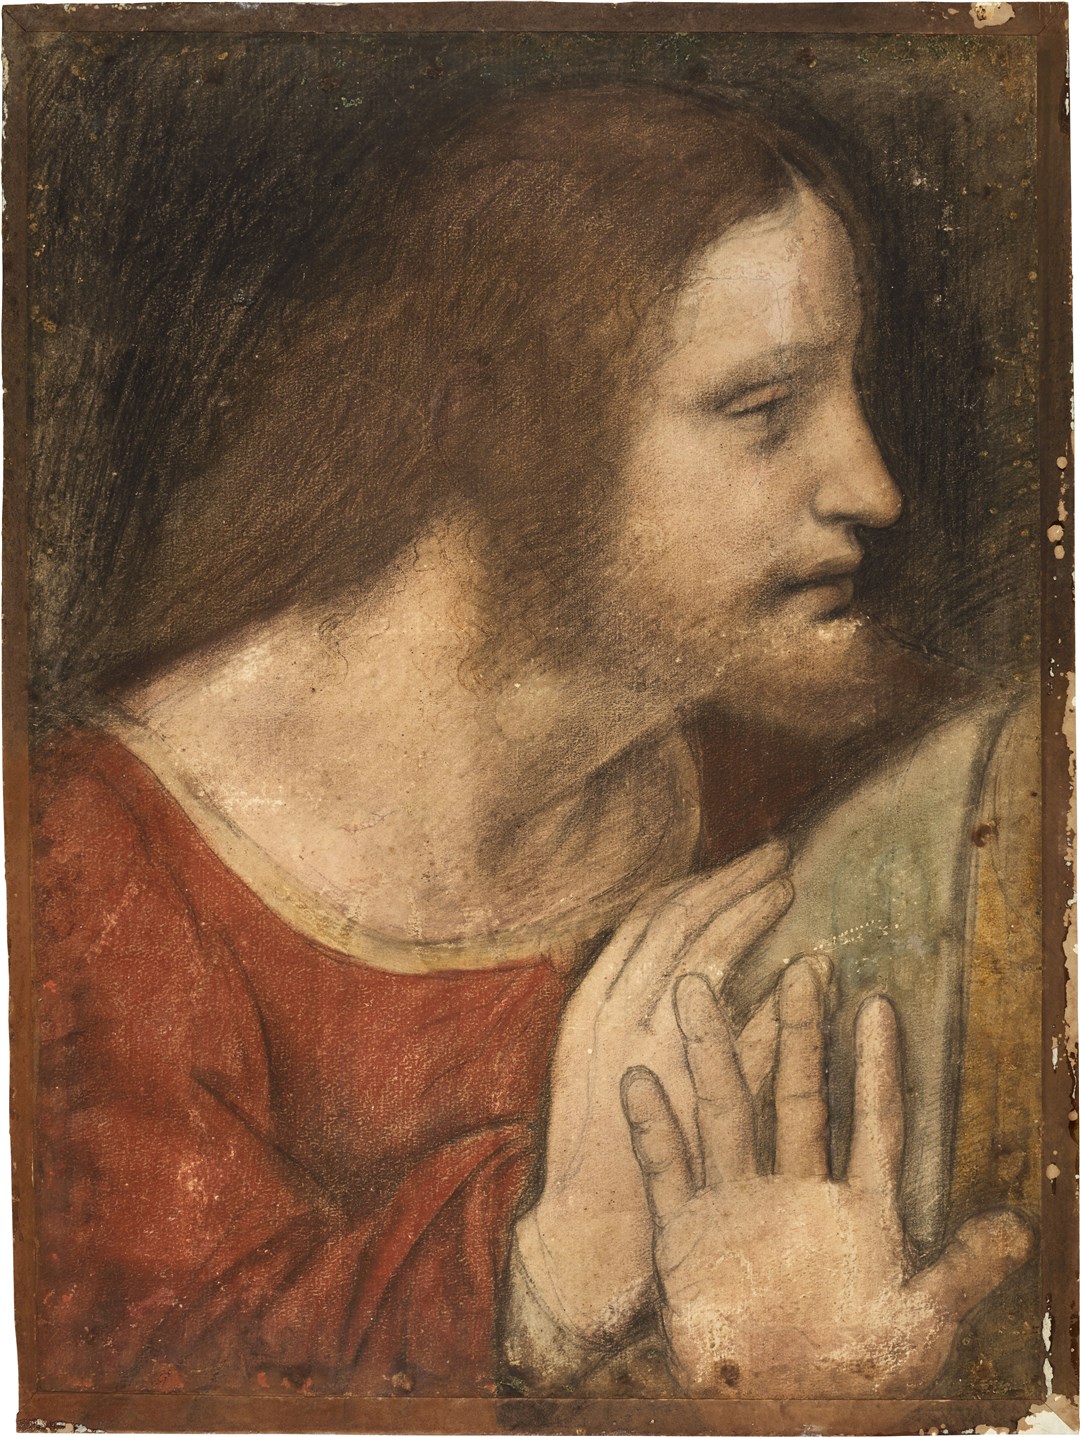 St James the Less with the indication of the right shoulder and open hand of St. Andrew (Sotheby’s/PA)